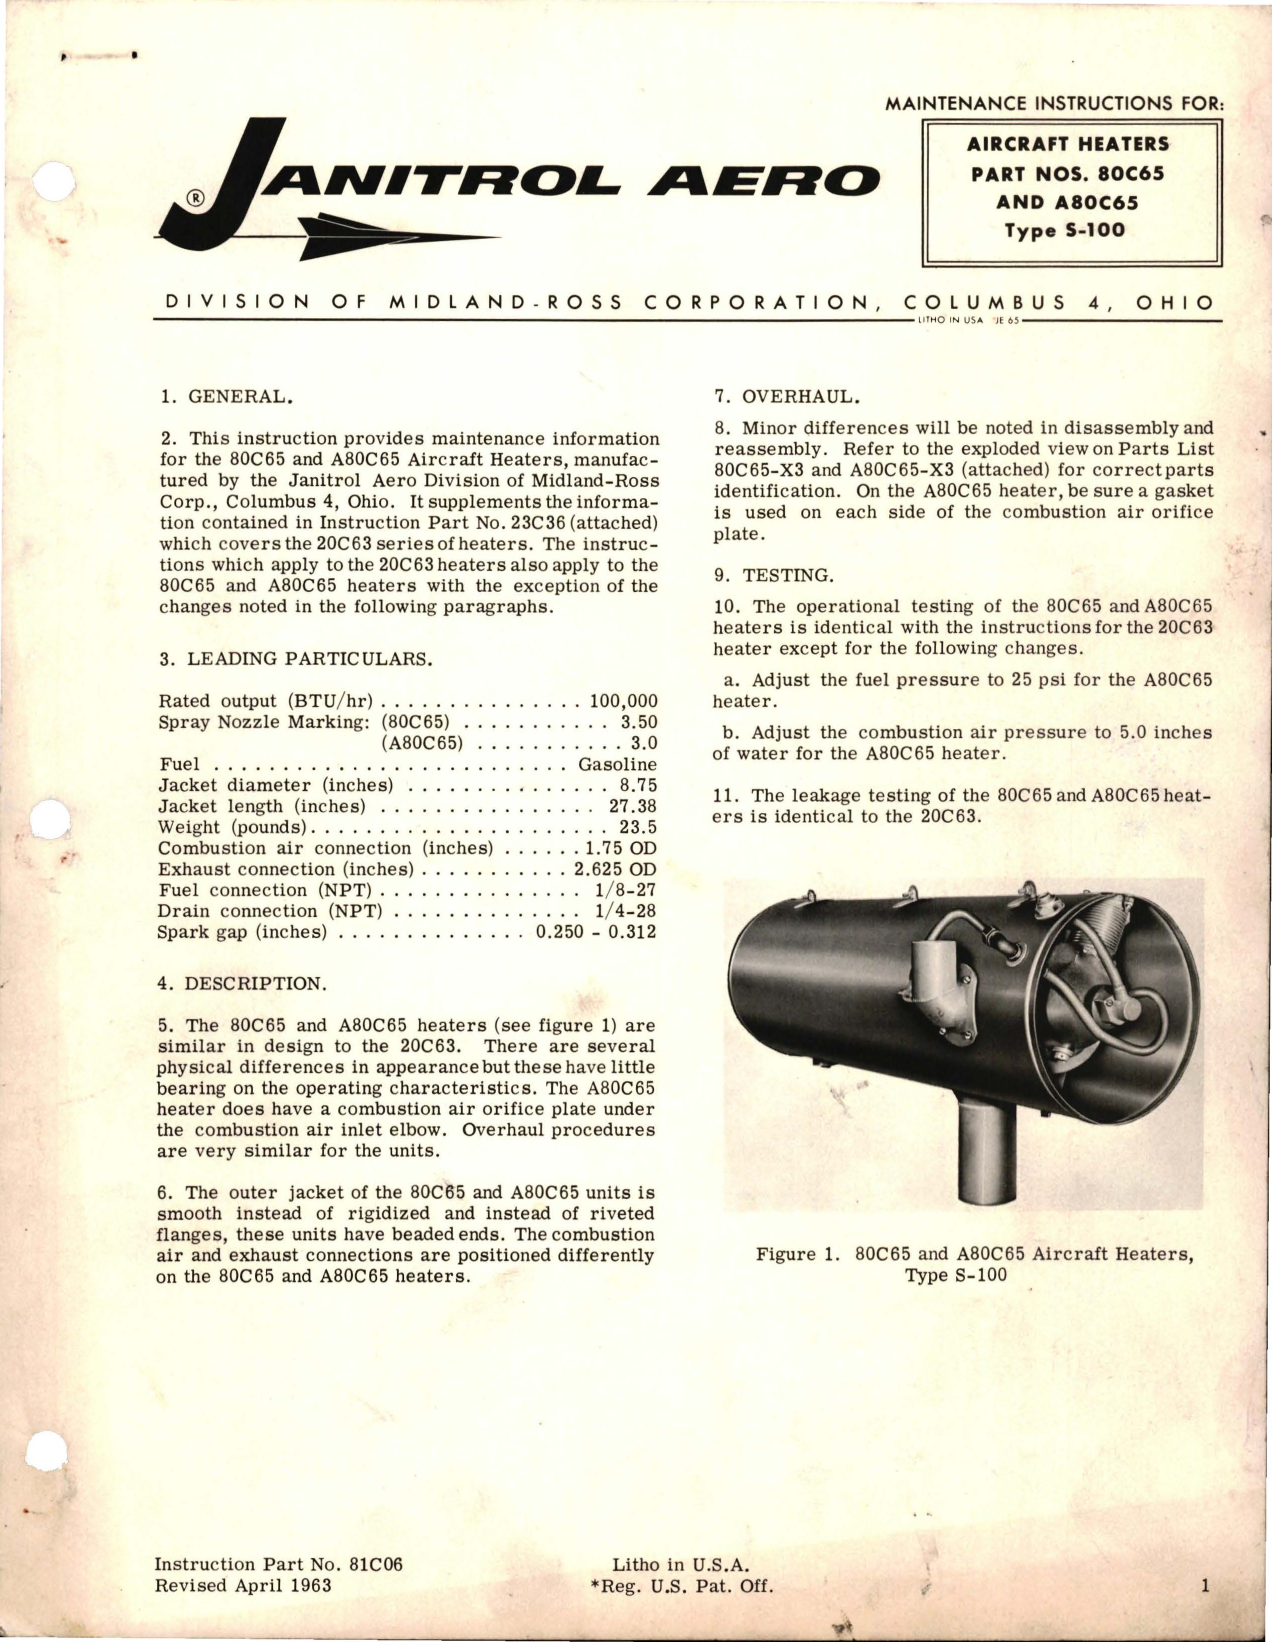 Sample page 1 from AirCorps Library document: Maintenance Instructions for Aircraft Heaters - Parts 80C65 and A80C65 - Type S-100